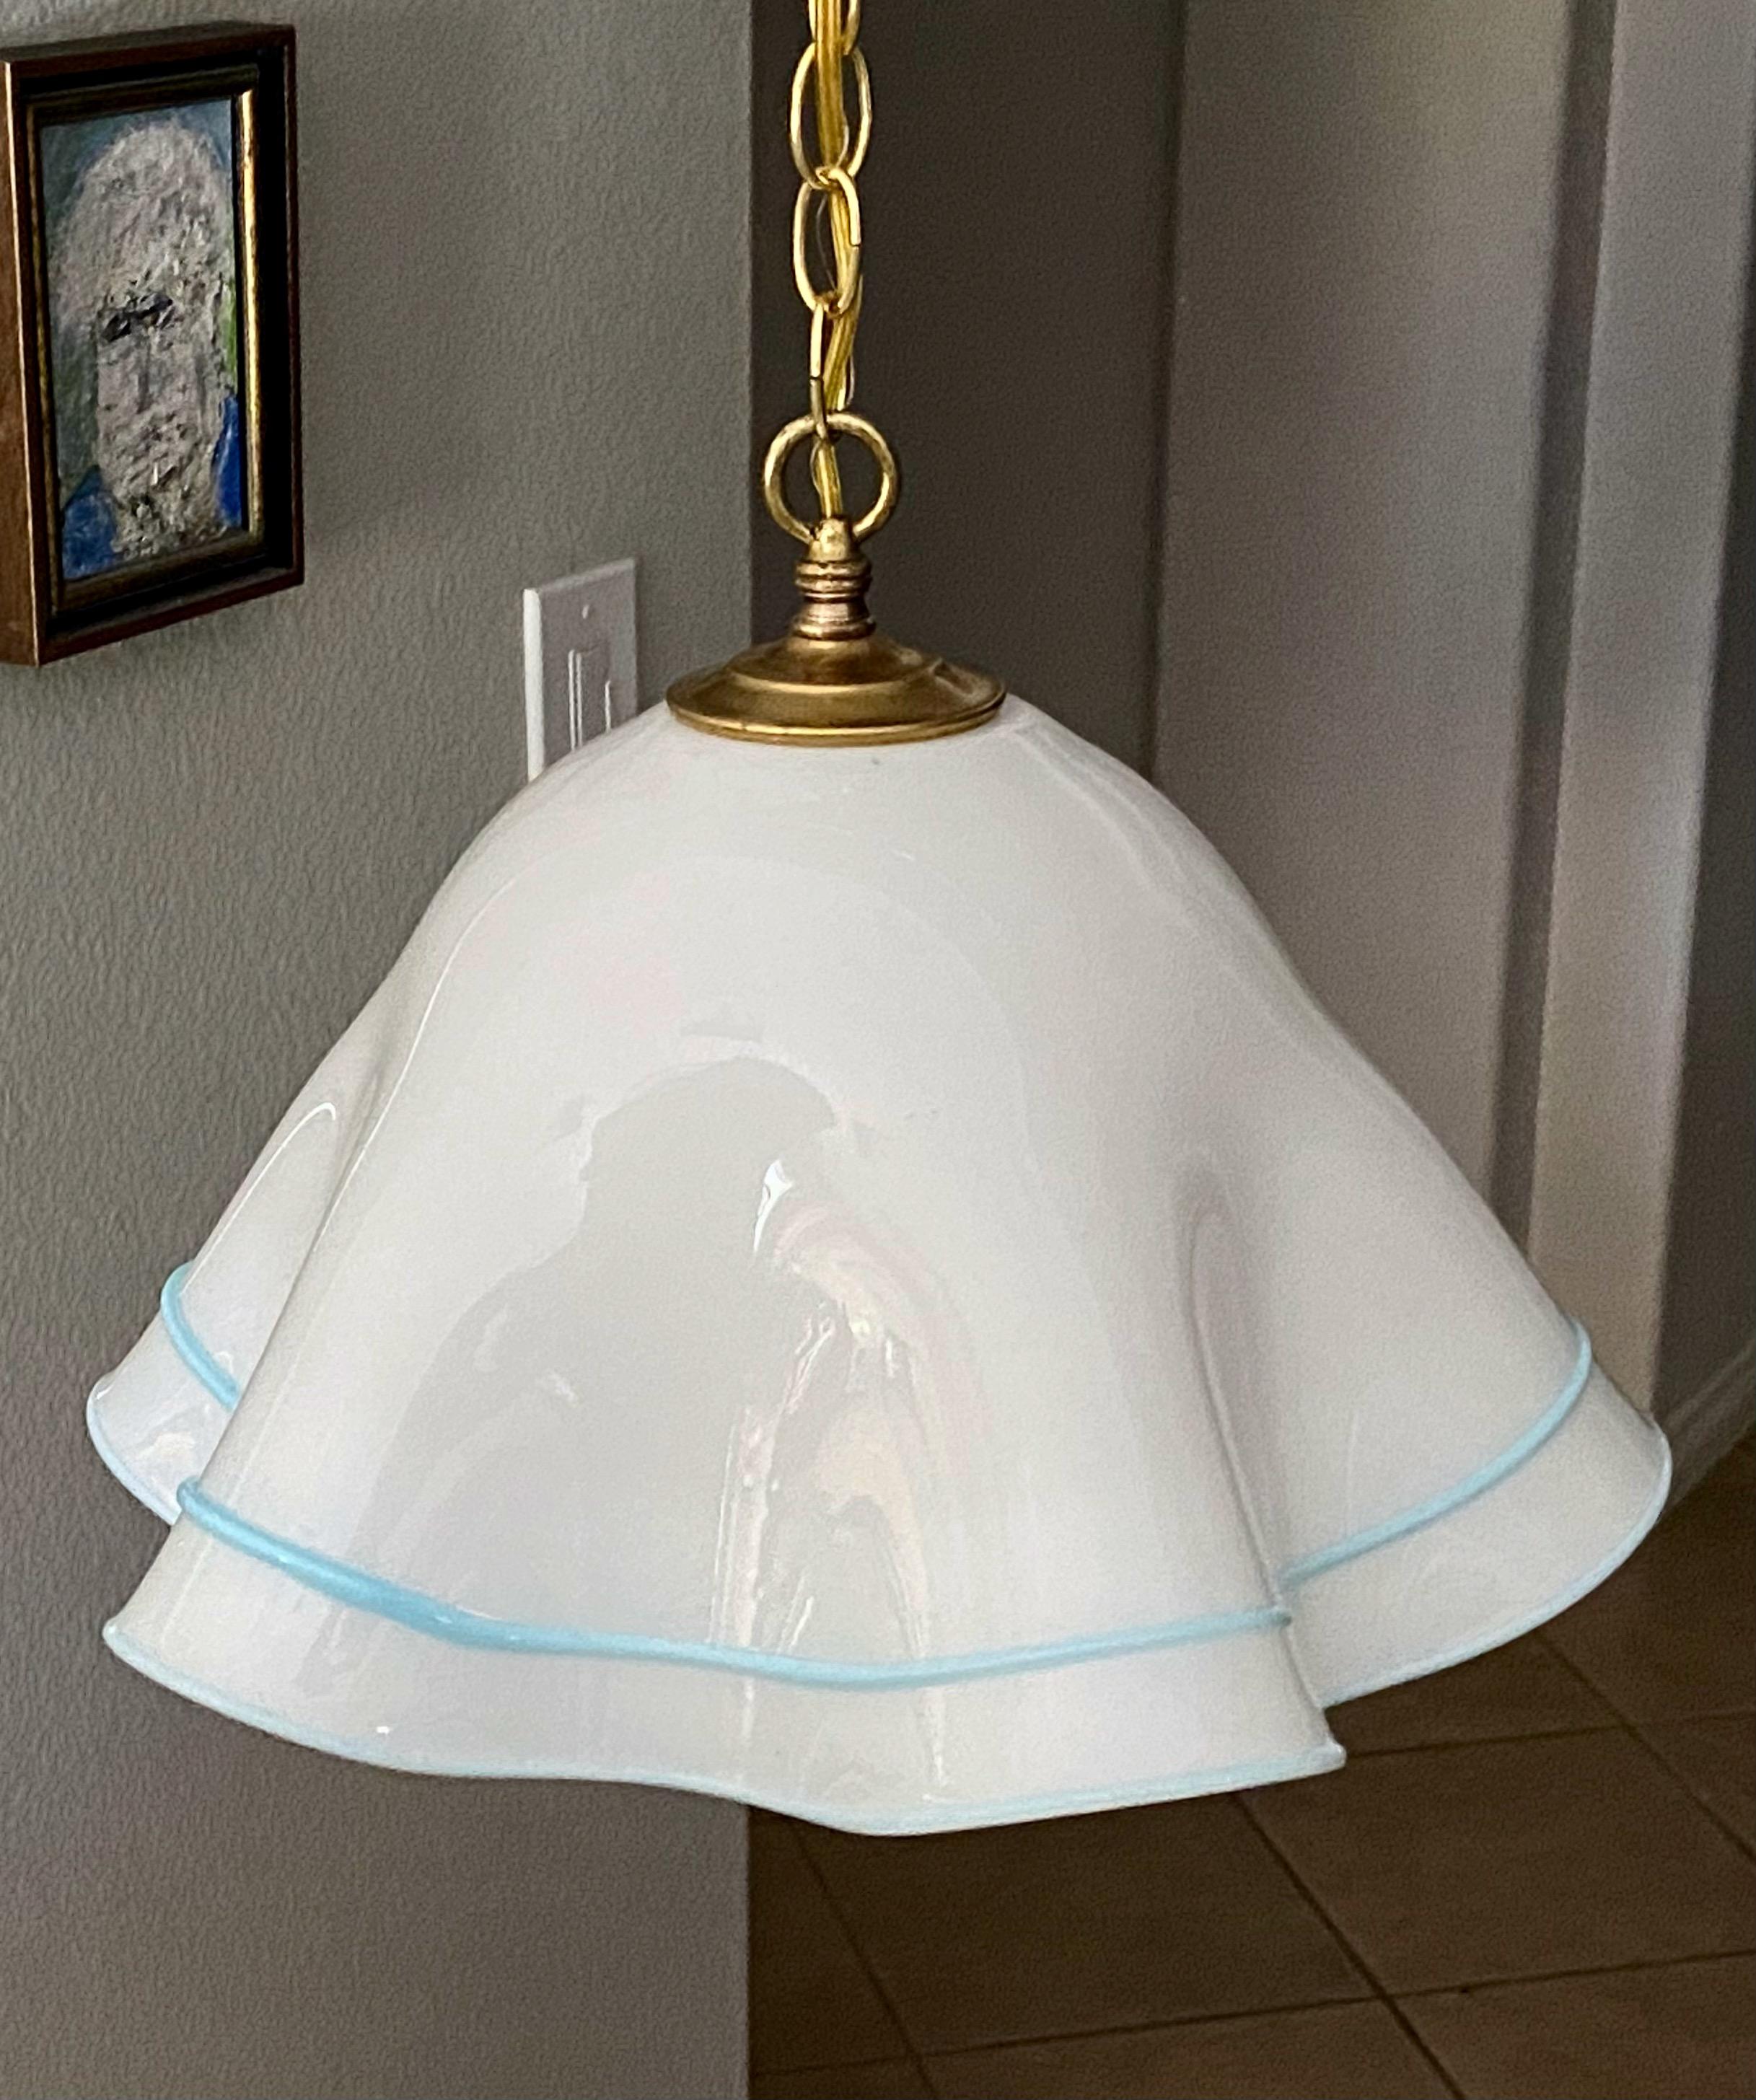 Italian Murano handkerchief pendant ceiling light with brass hardware. Hand blown Murano glass body is white with baby blue trim. Uses regular A base bulb. Newly wired. Perfect for hall, entry or breakfast eating area. 
Fixture size 12